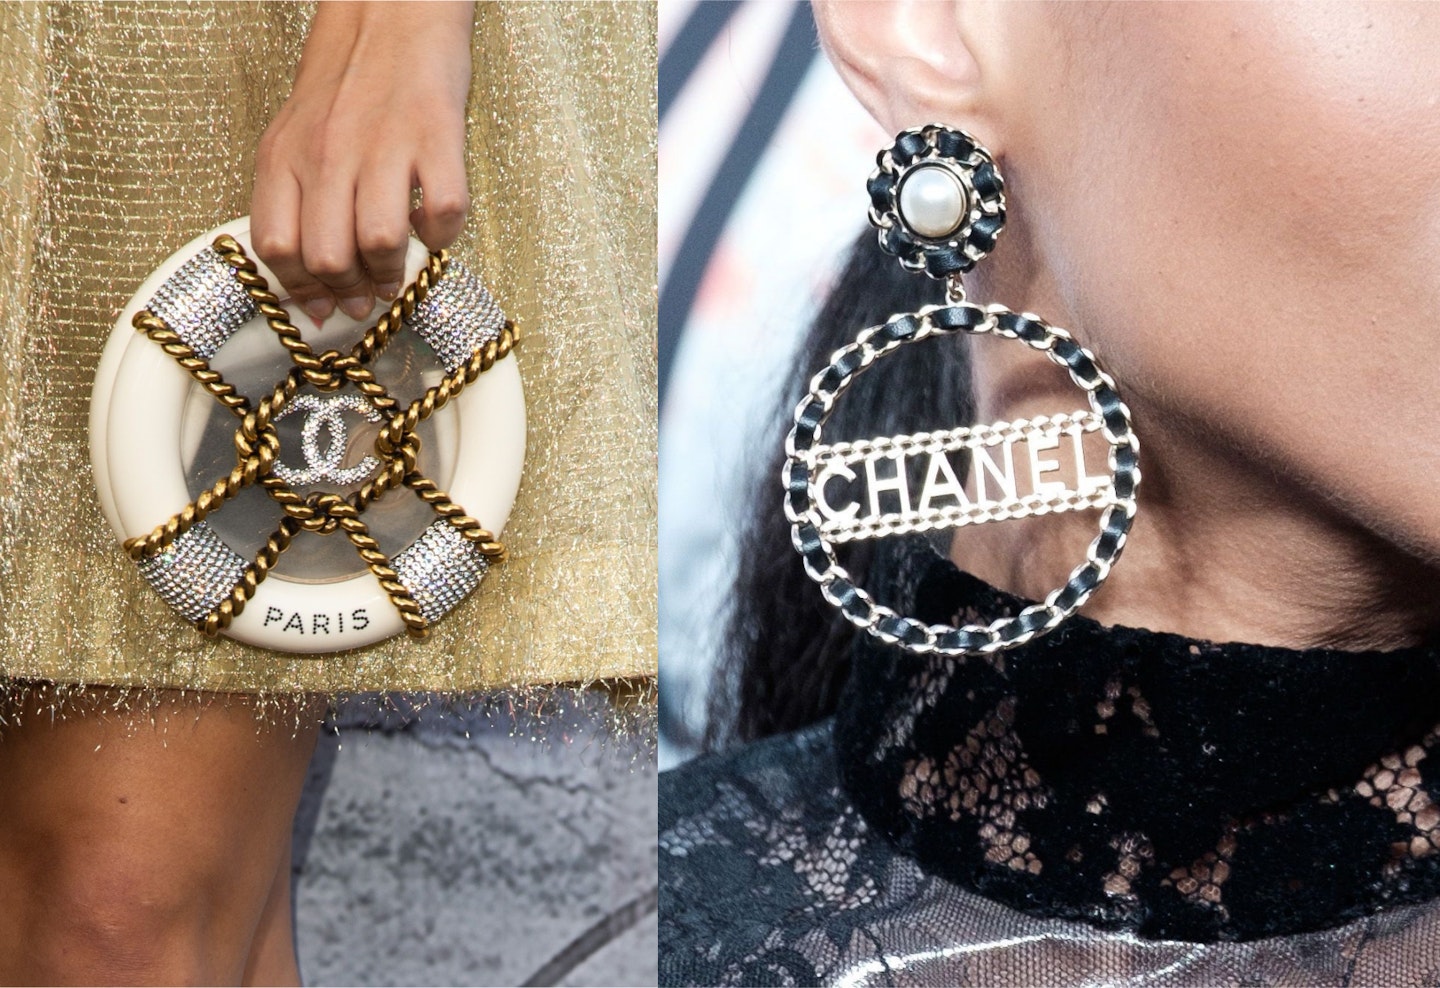 The Whimsical Chanel Accessories At The Serpentine Summer Party